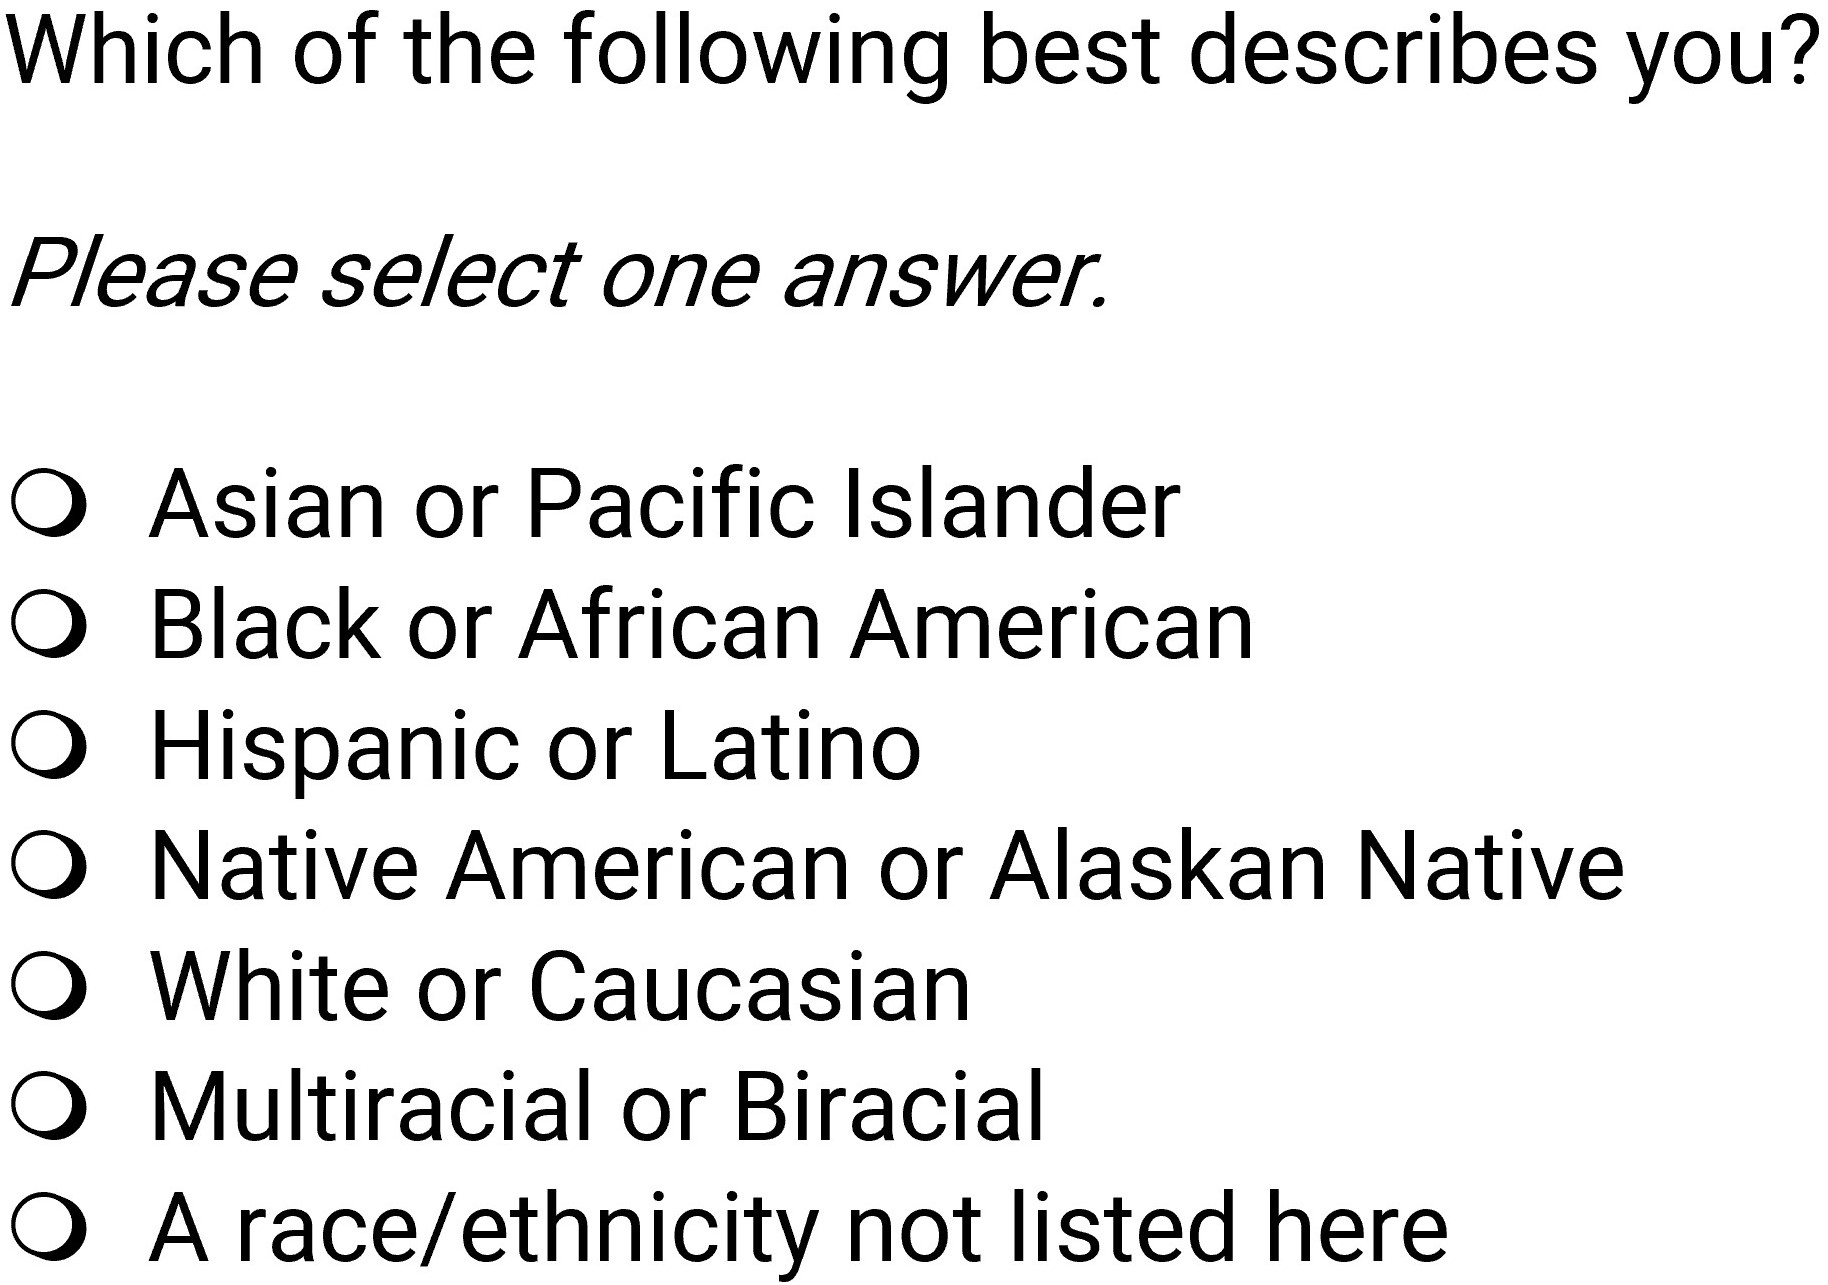 research questions on race and ethnicity